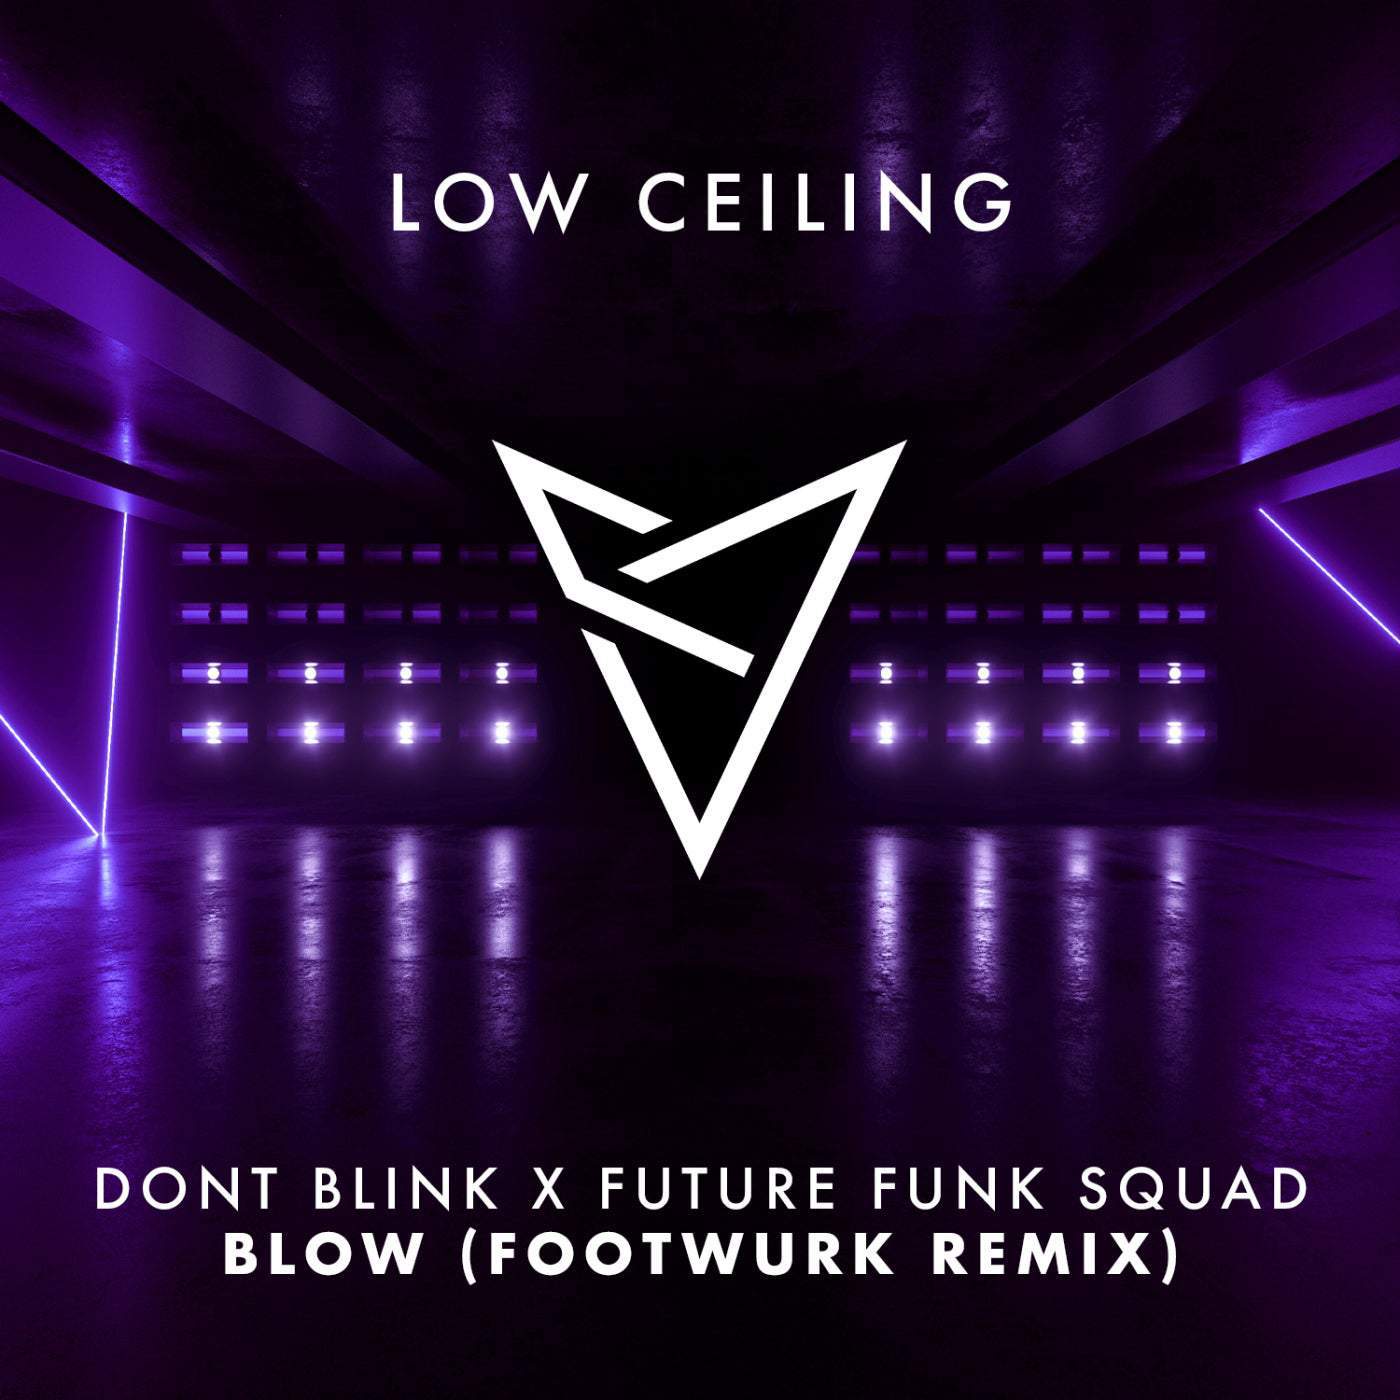 image cover: Future Funk Squad, DONT BLINK - BLOW (FOOTWURK Remix) on LOW CEILING